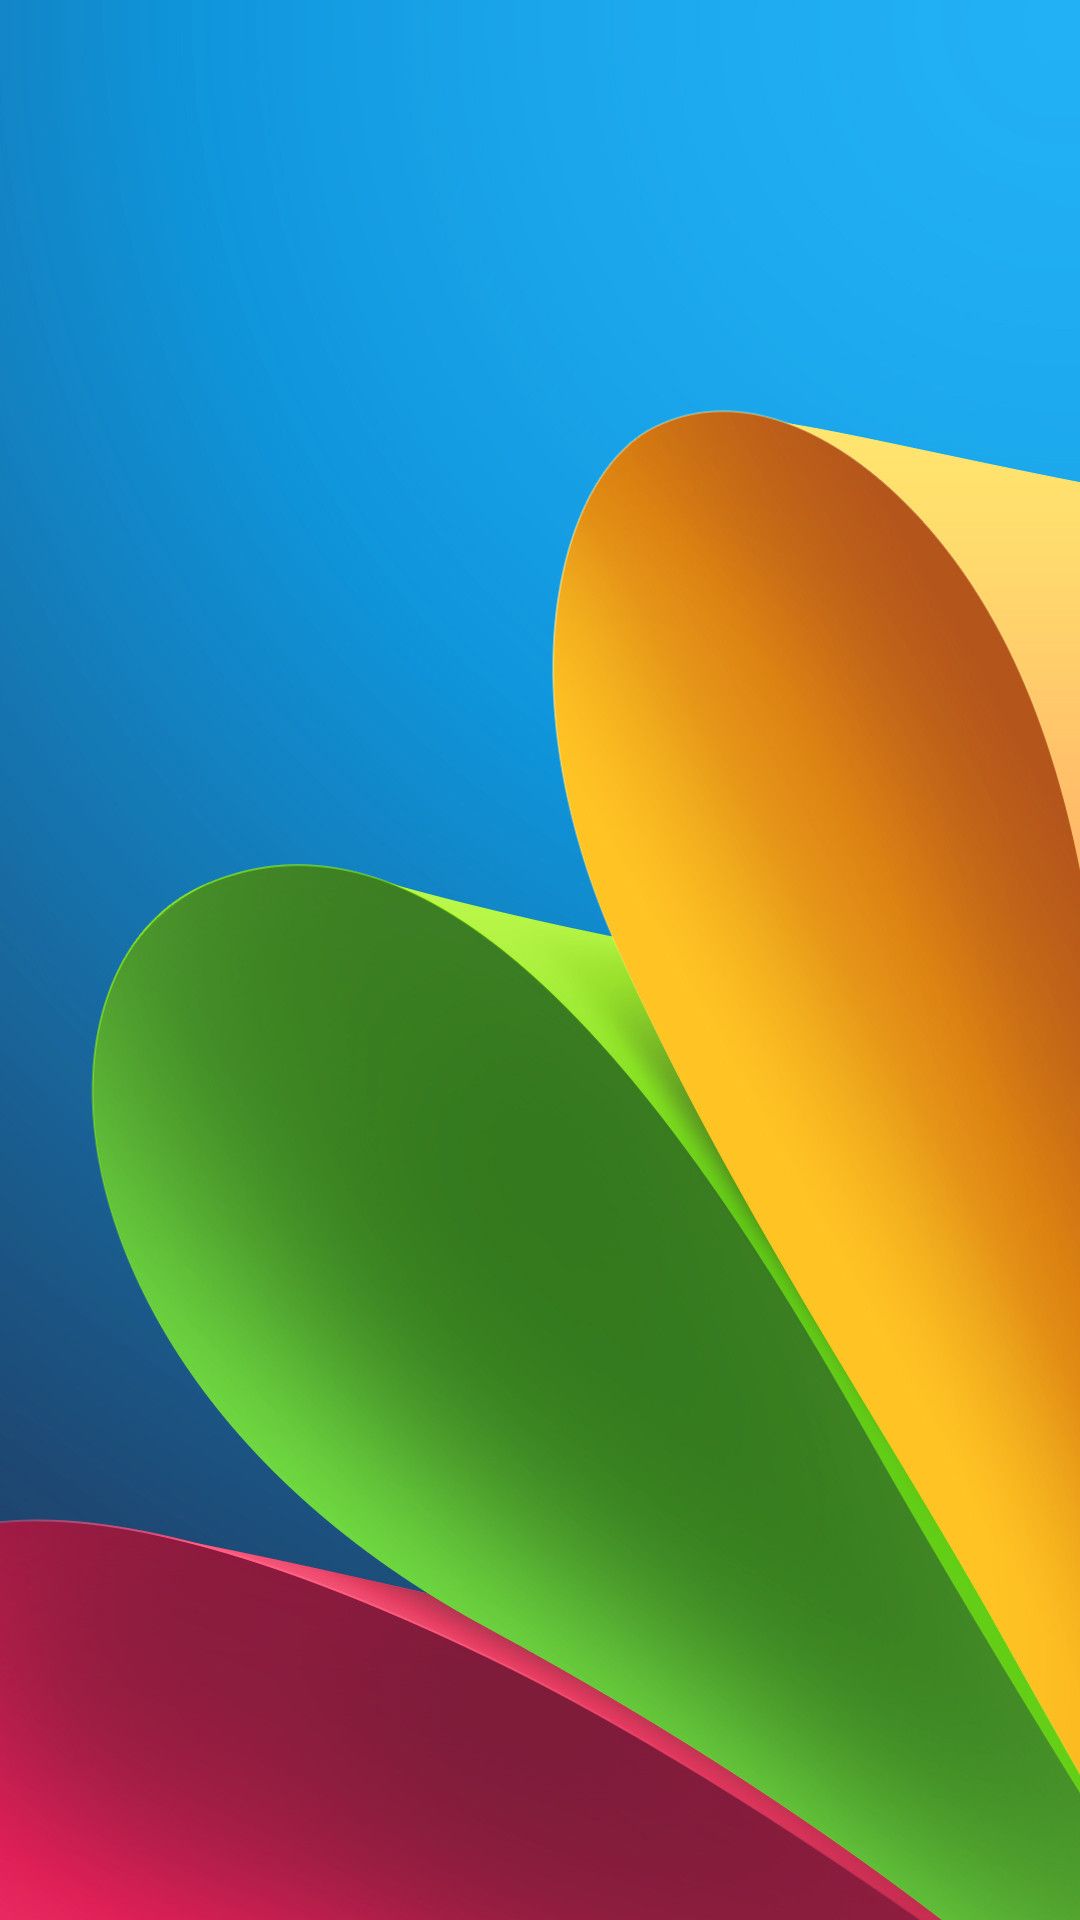 WALLPAPERS] All MIUI V6 Wallpapers + Locksc… | Android Development ...